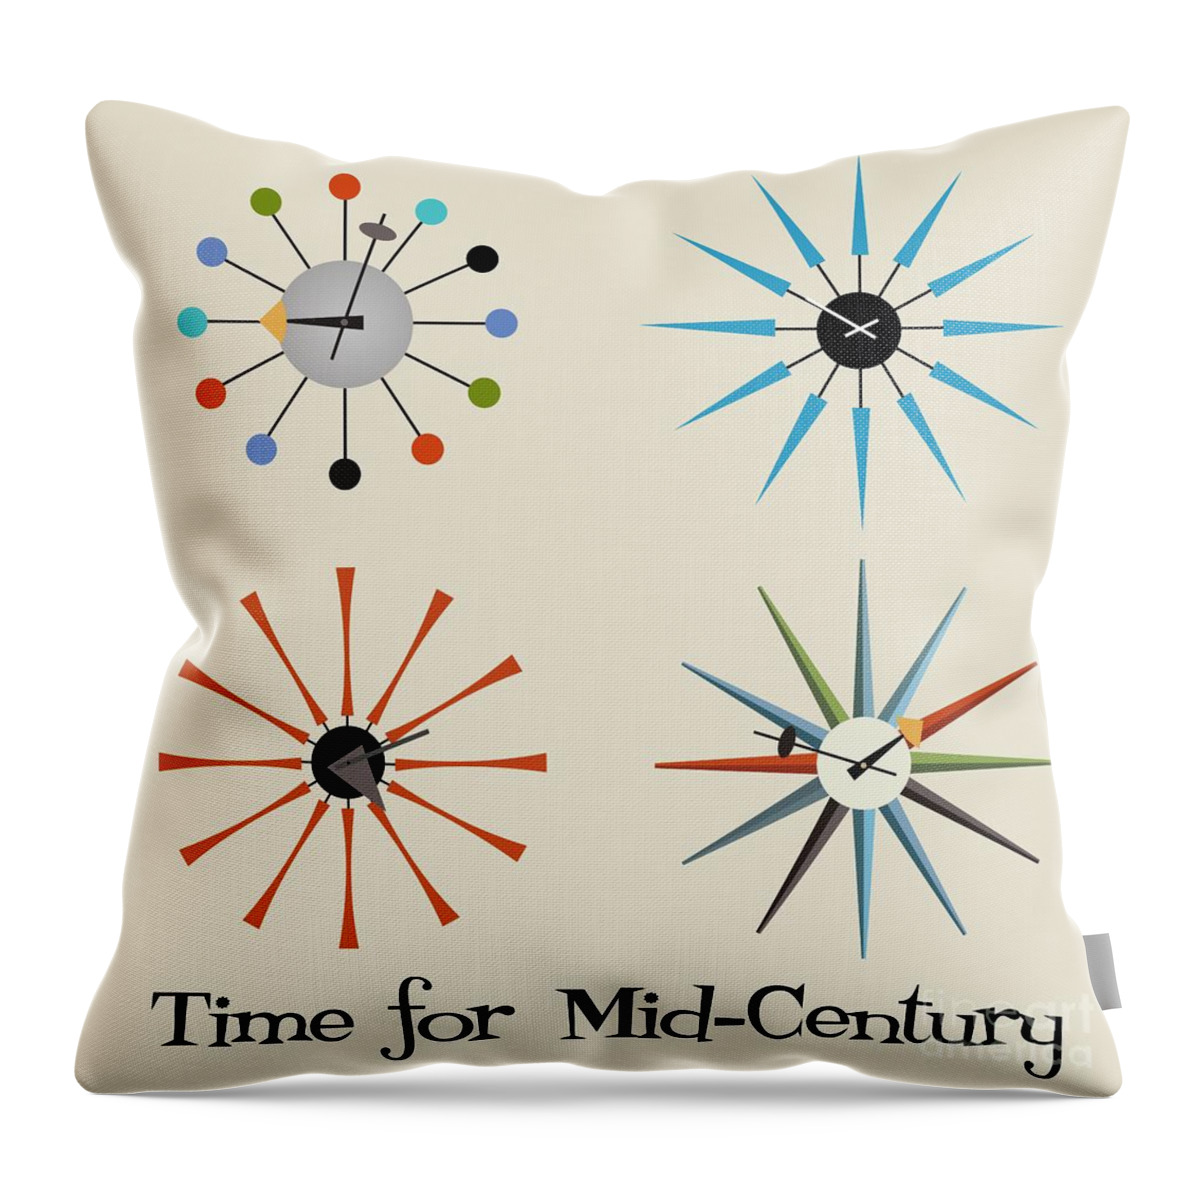 Mid-century Throw Pillow featuring the digital art Time for Mid-Century by Donna Mibus